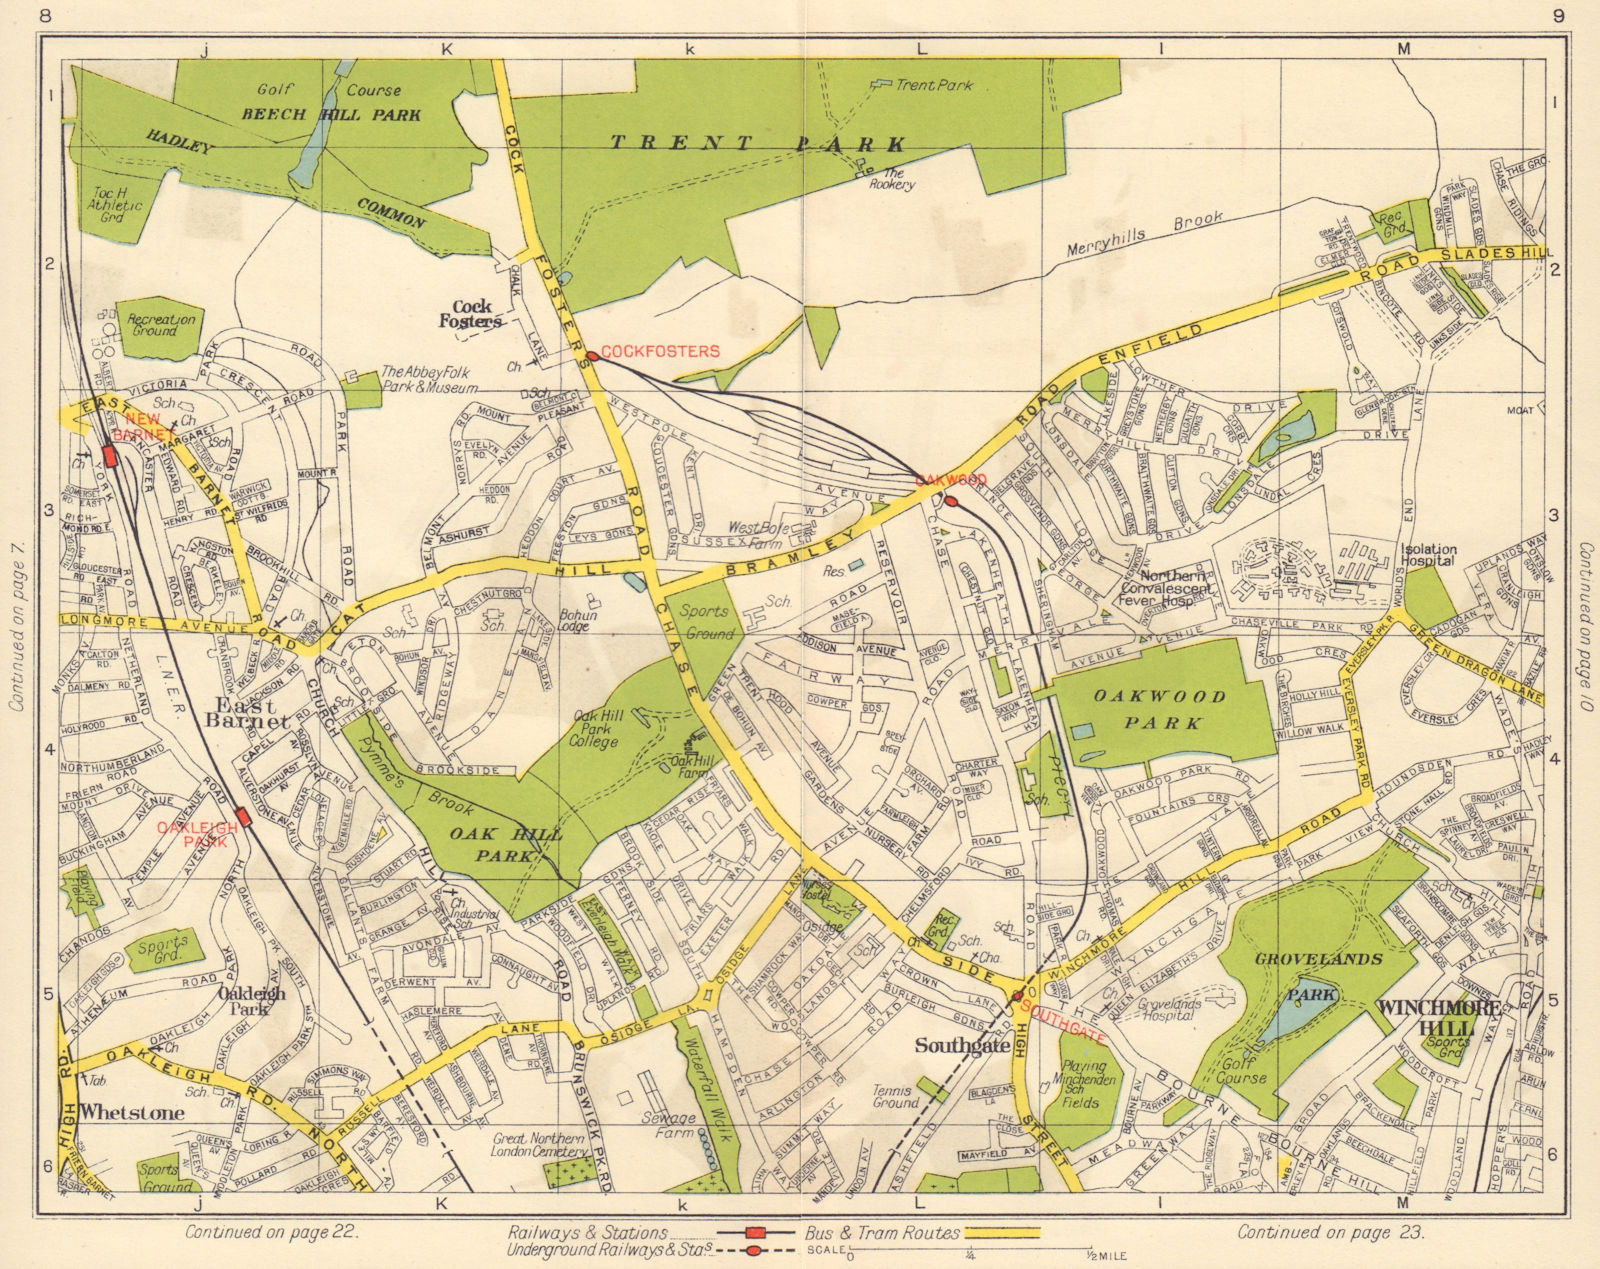 N LONDON. Southgate Cockfosters Oakleigh Park East Barnet Winchmore 1948 map